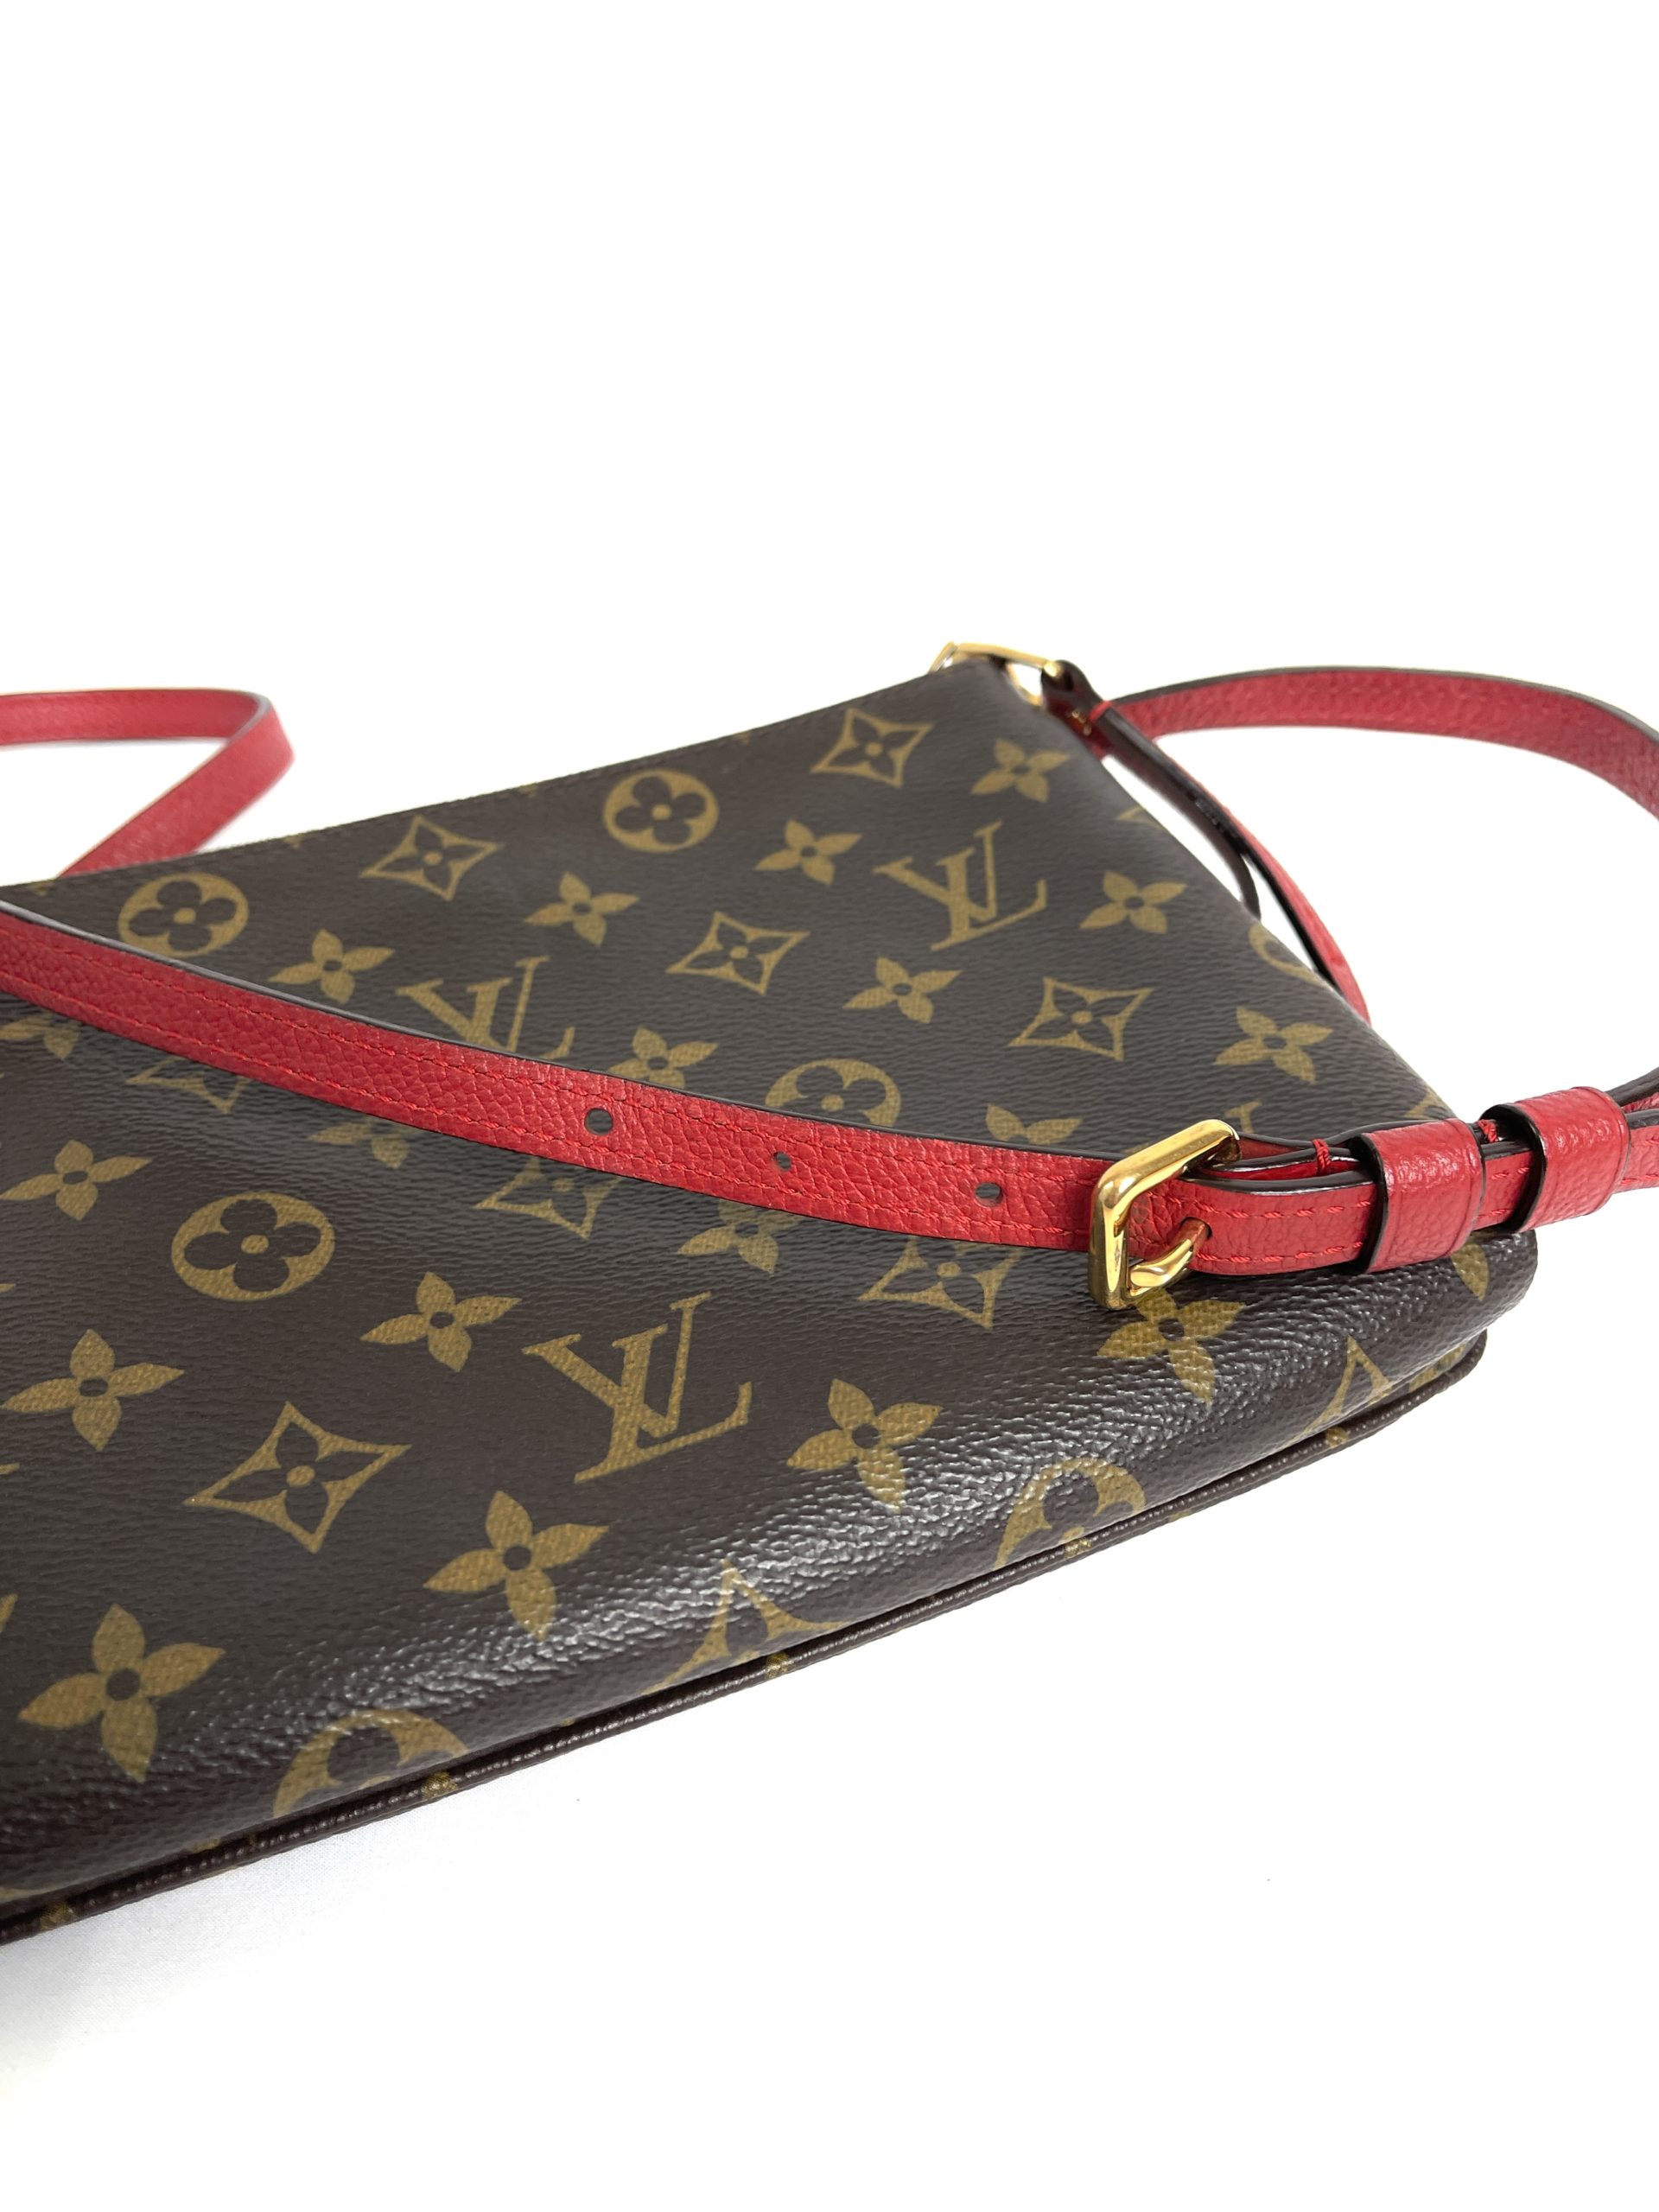 Louis Vuitton Twinset in Red, shoulder strap in leather, more